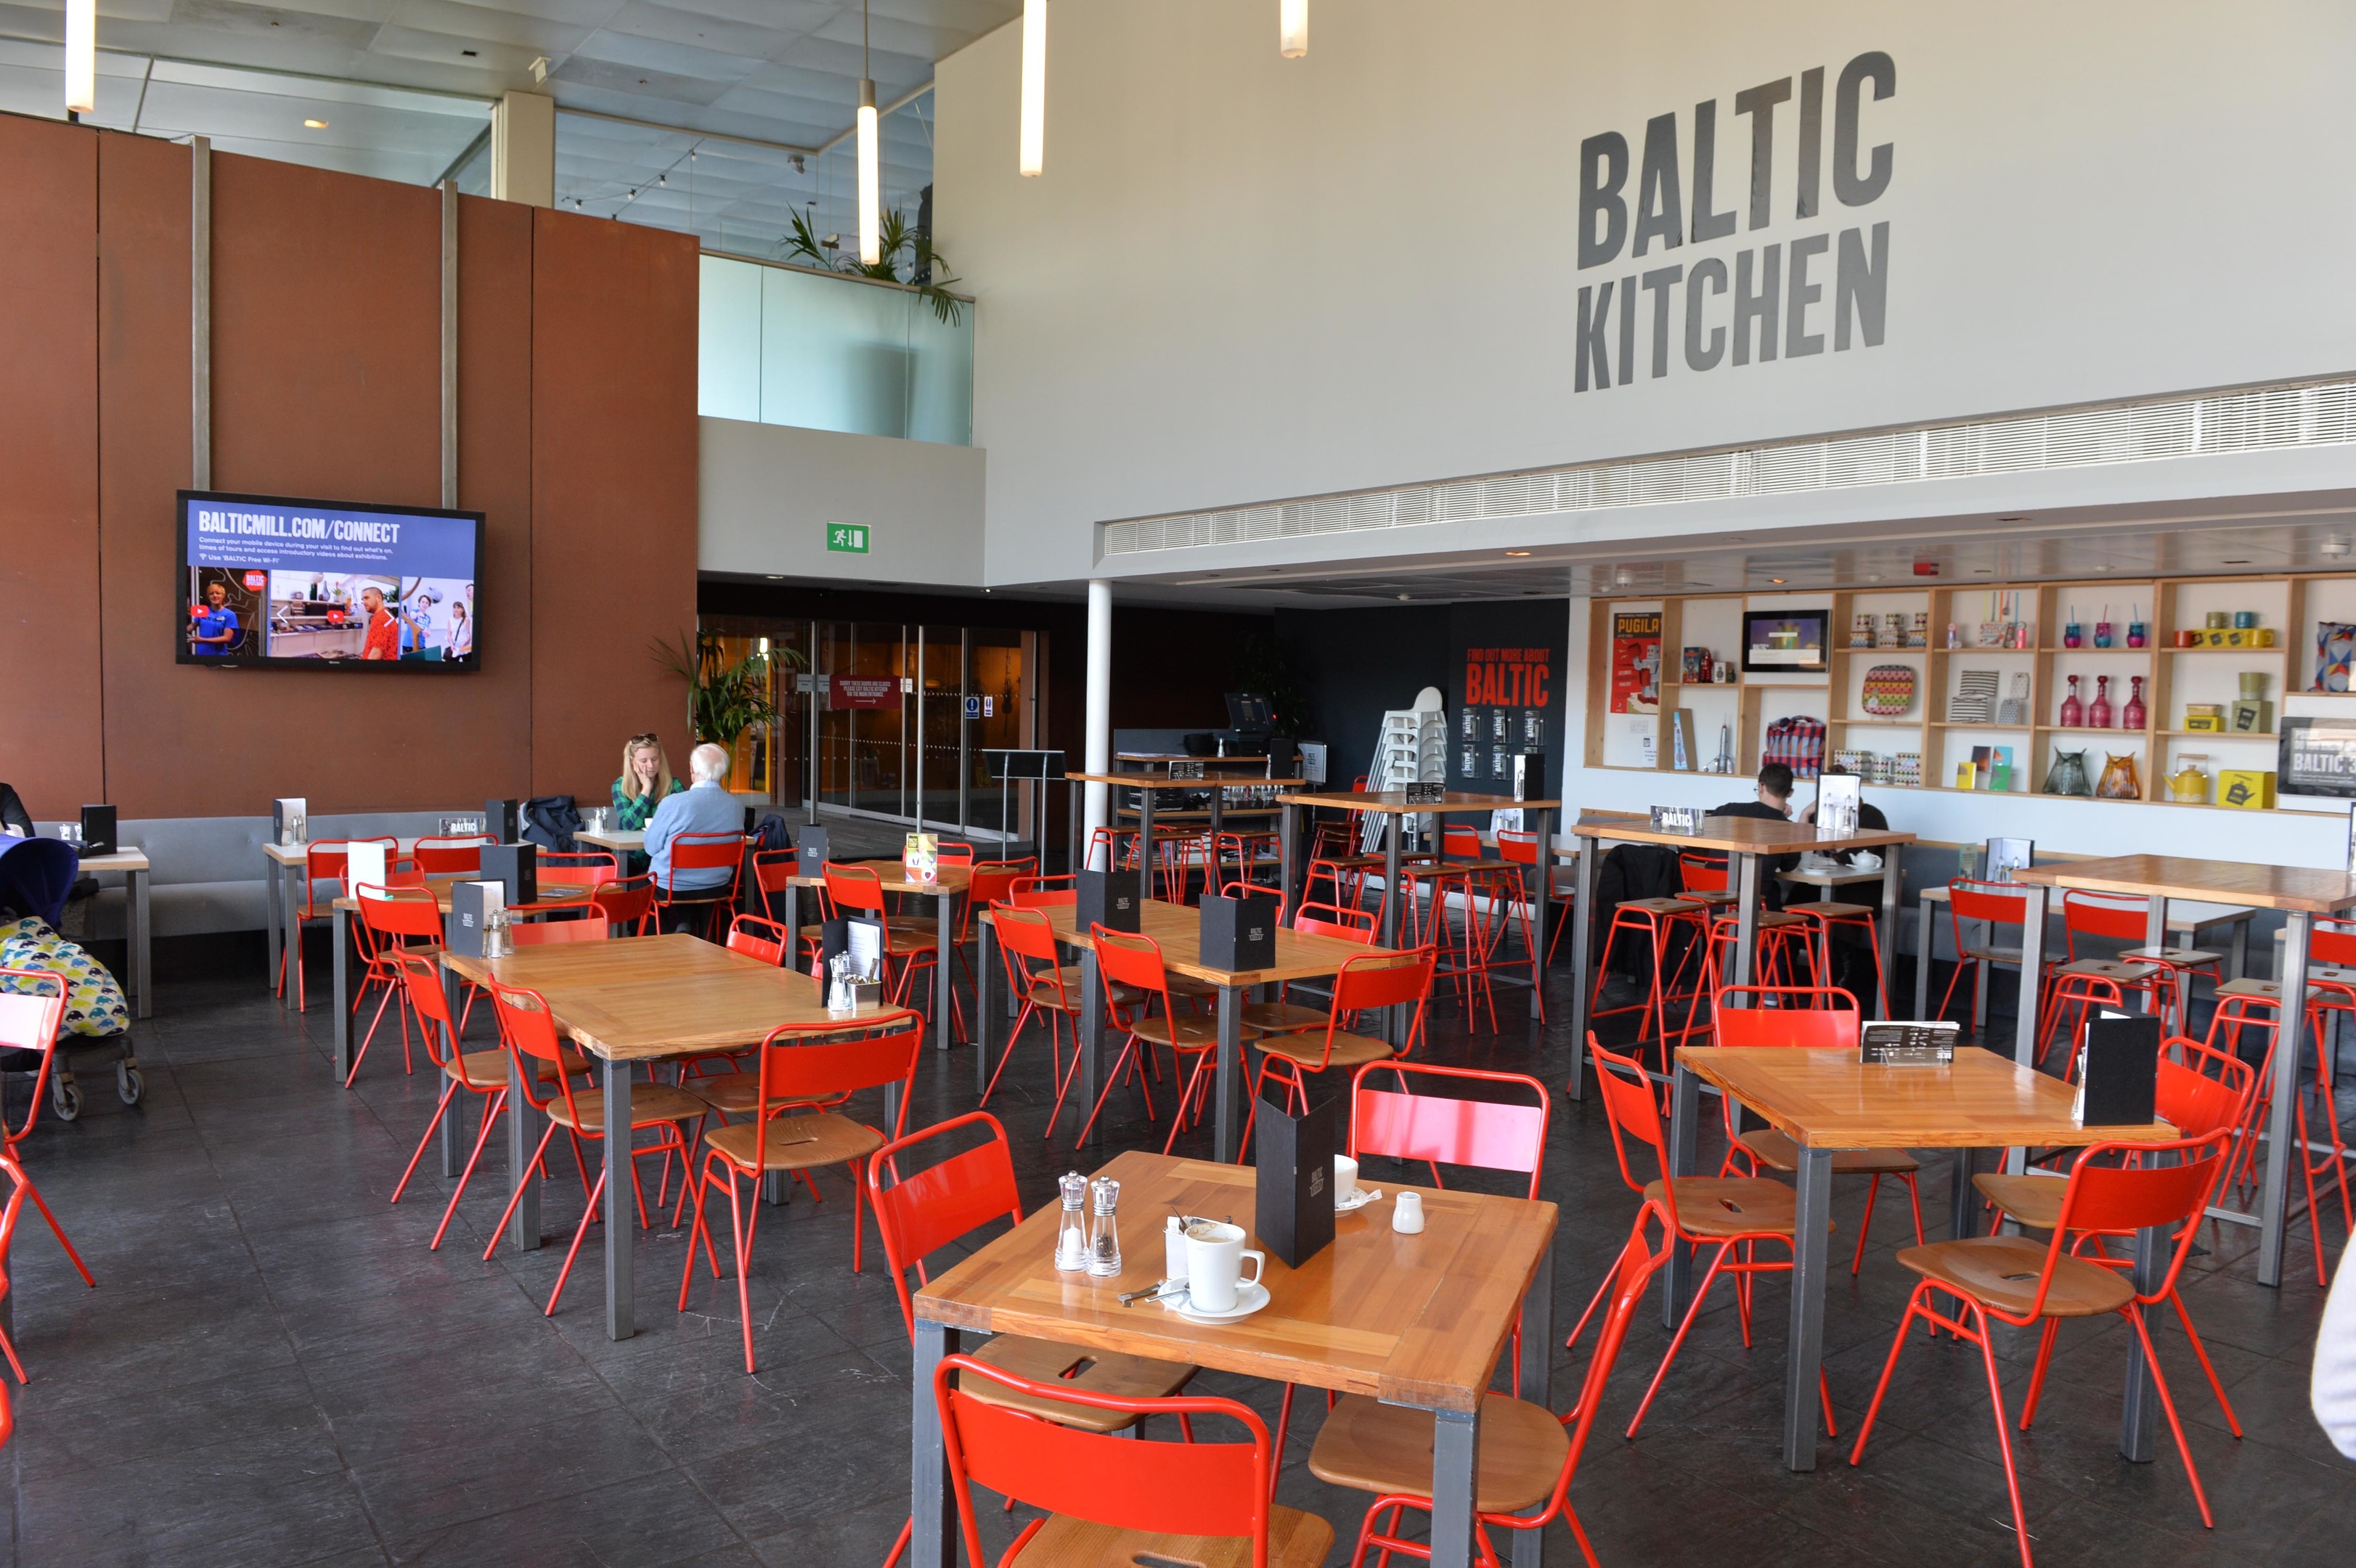 The Baltic Kitchen (Paul Vicente /Sunday Post)